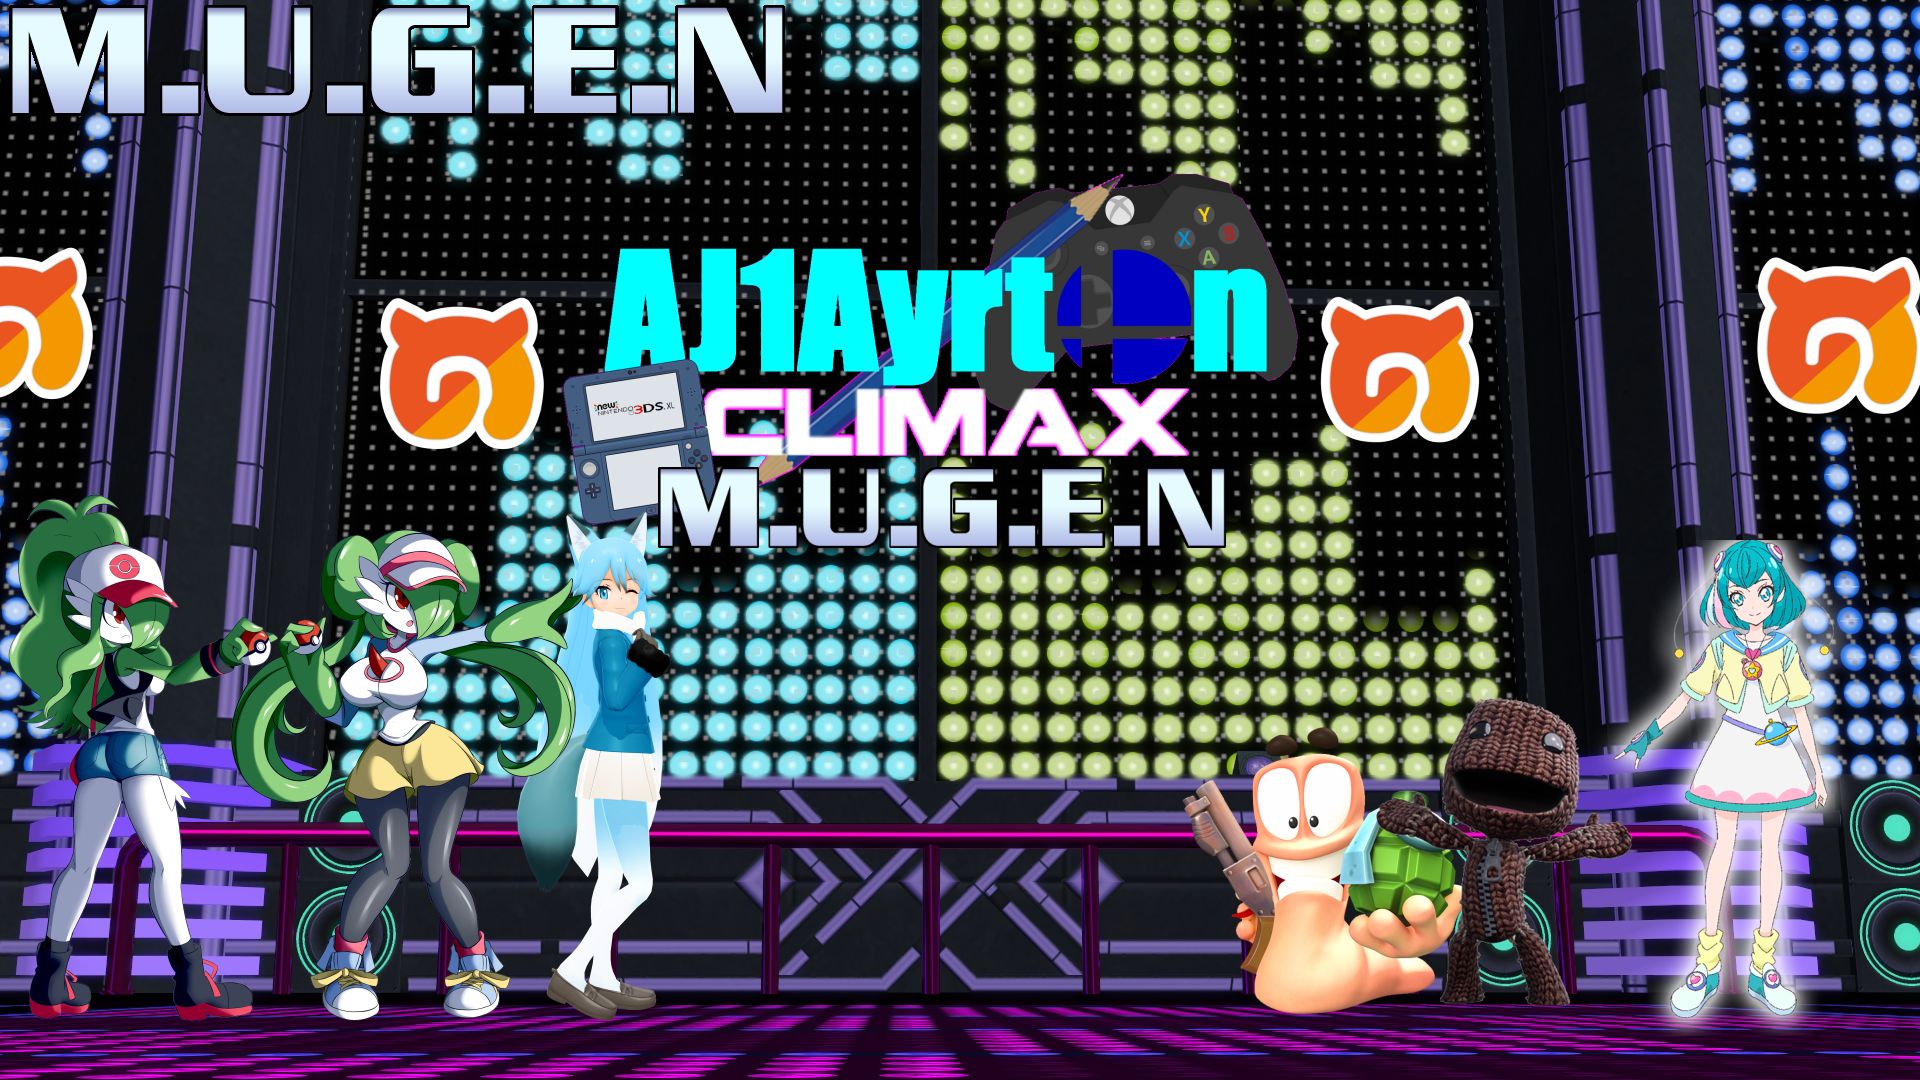 M U G E N 1 0 Stage Aj1ayrtonclimax Remix Hd Dl By Ayrtonclimax On Deviantart